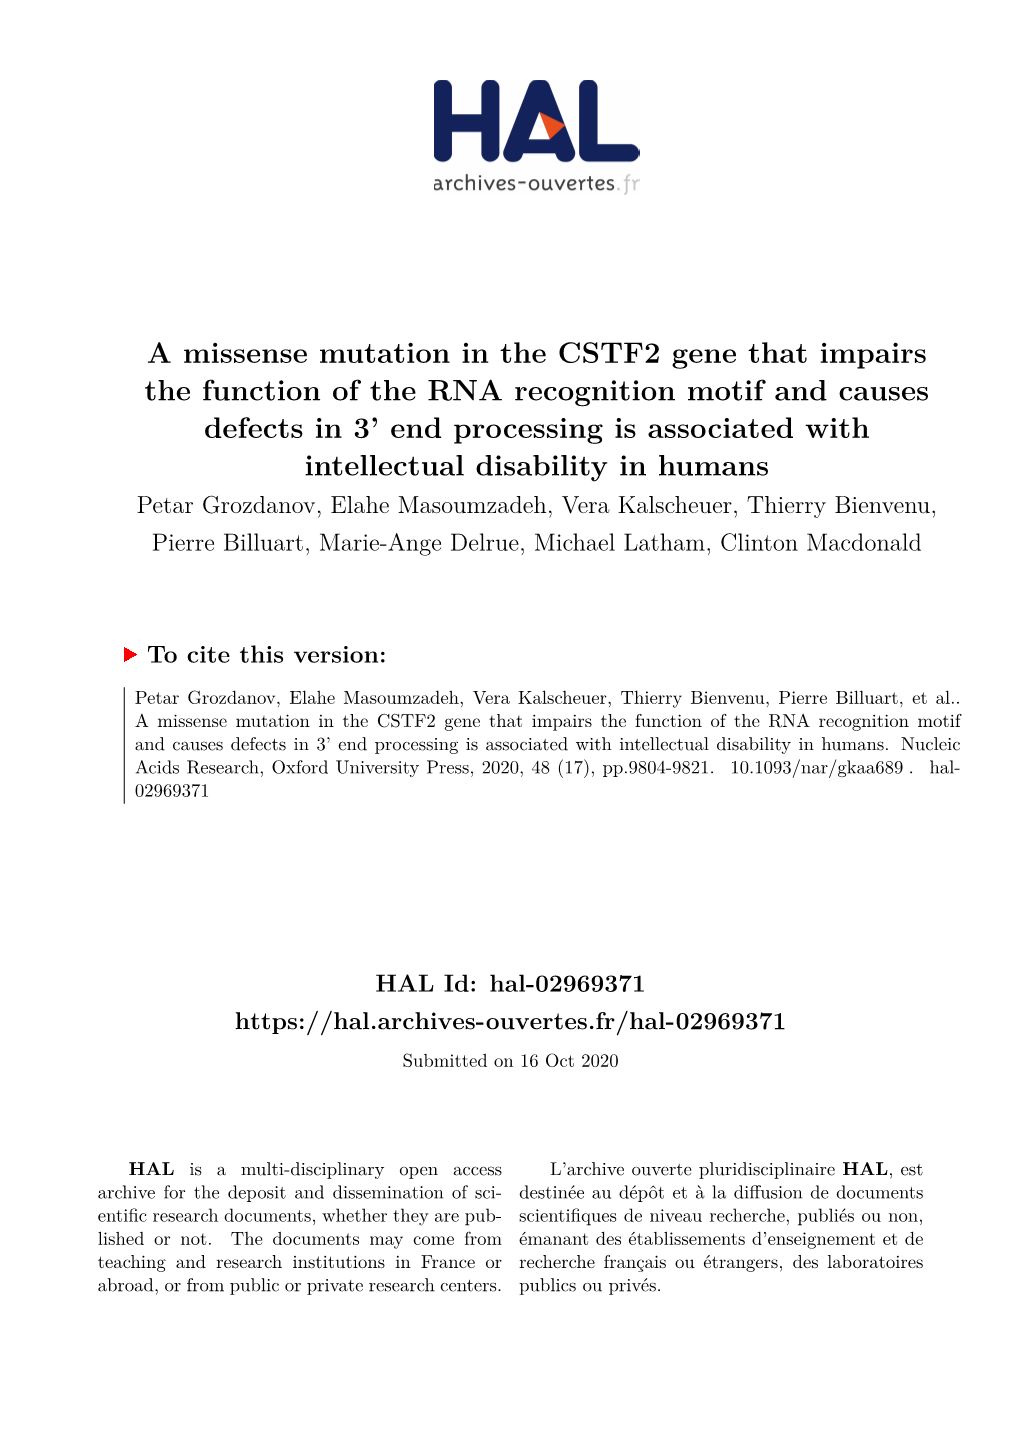 A Missense Mutation in the CSTF2 Gene That Impairs the Function of the RNA Recognition Motif and Causes Defects in 3' End Pr